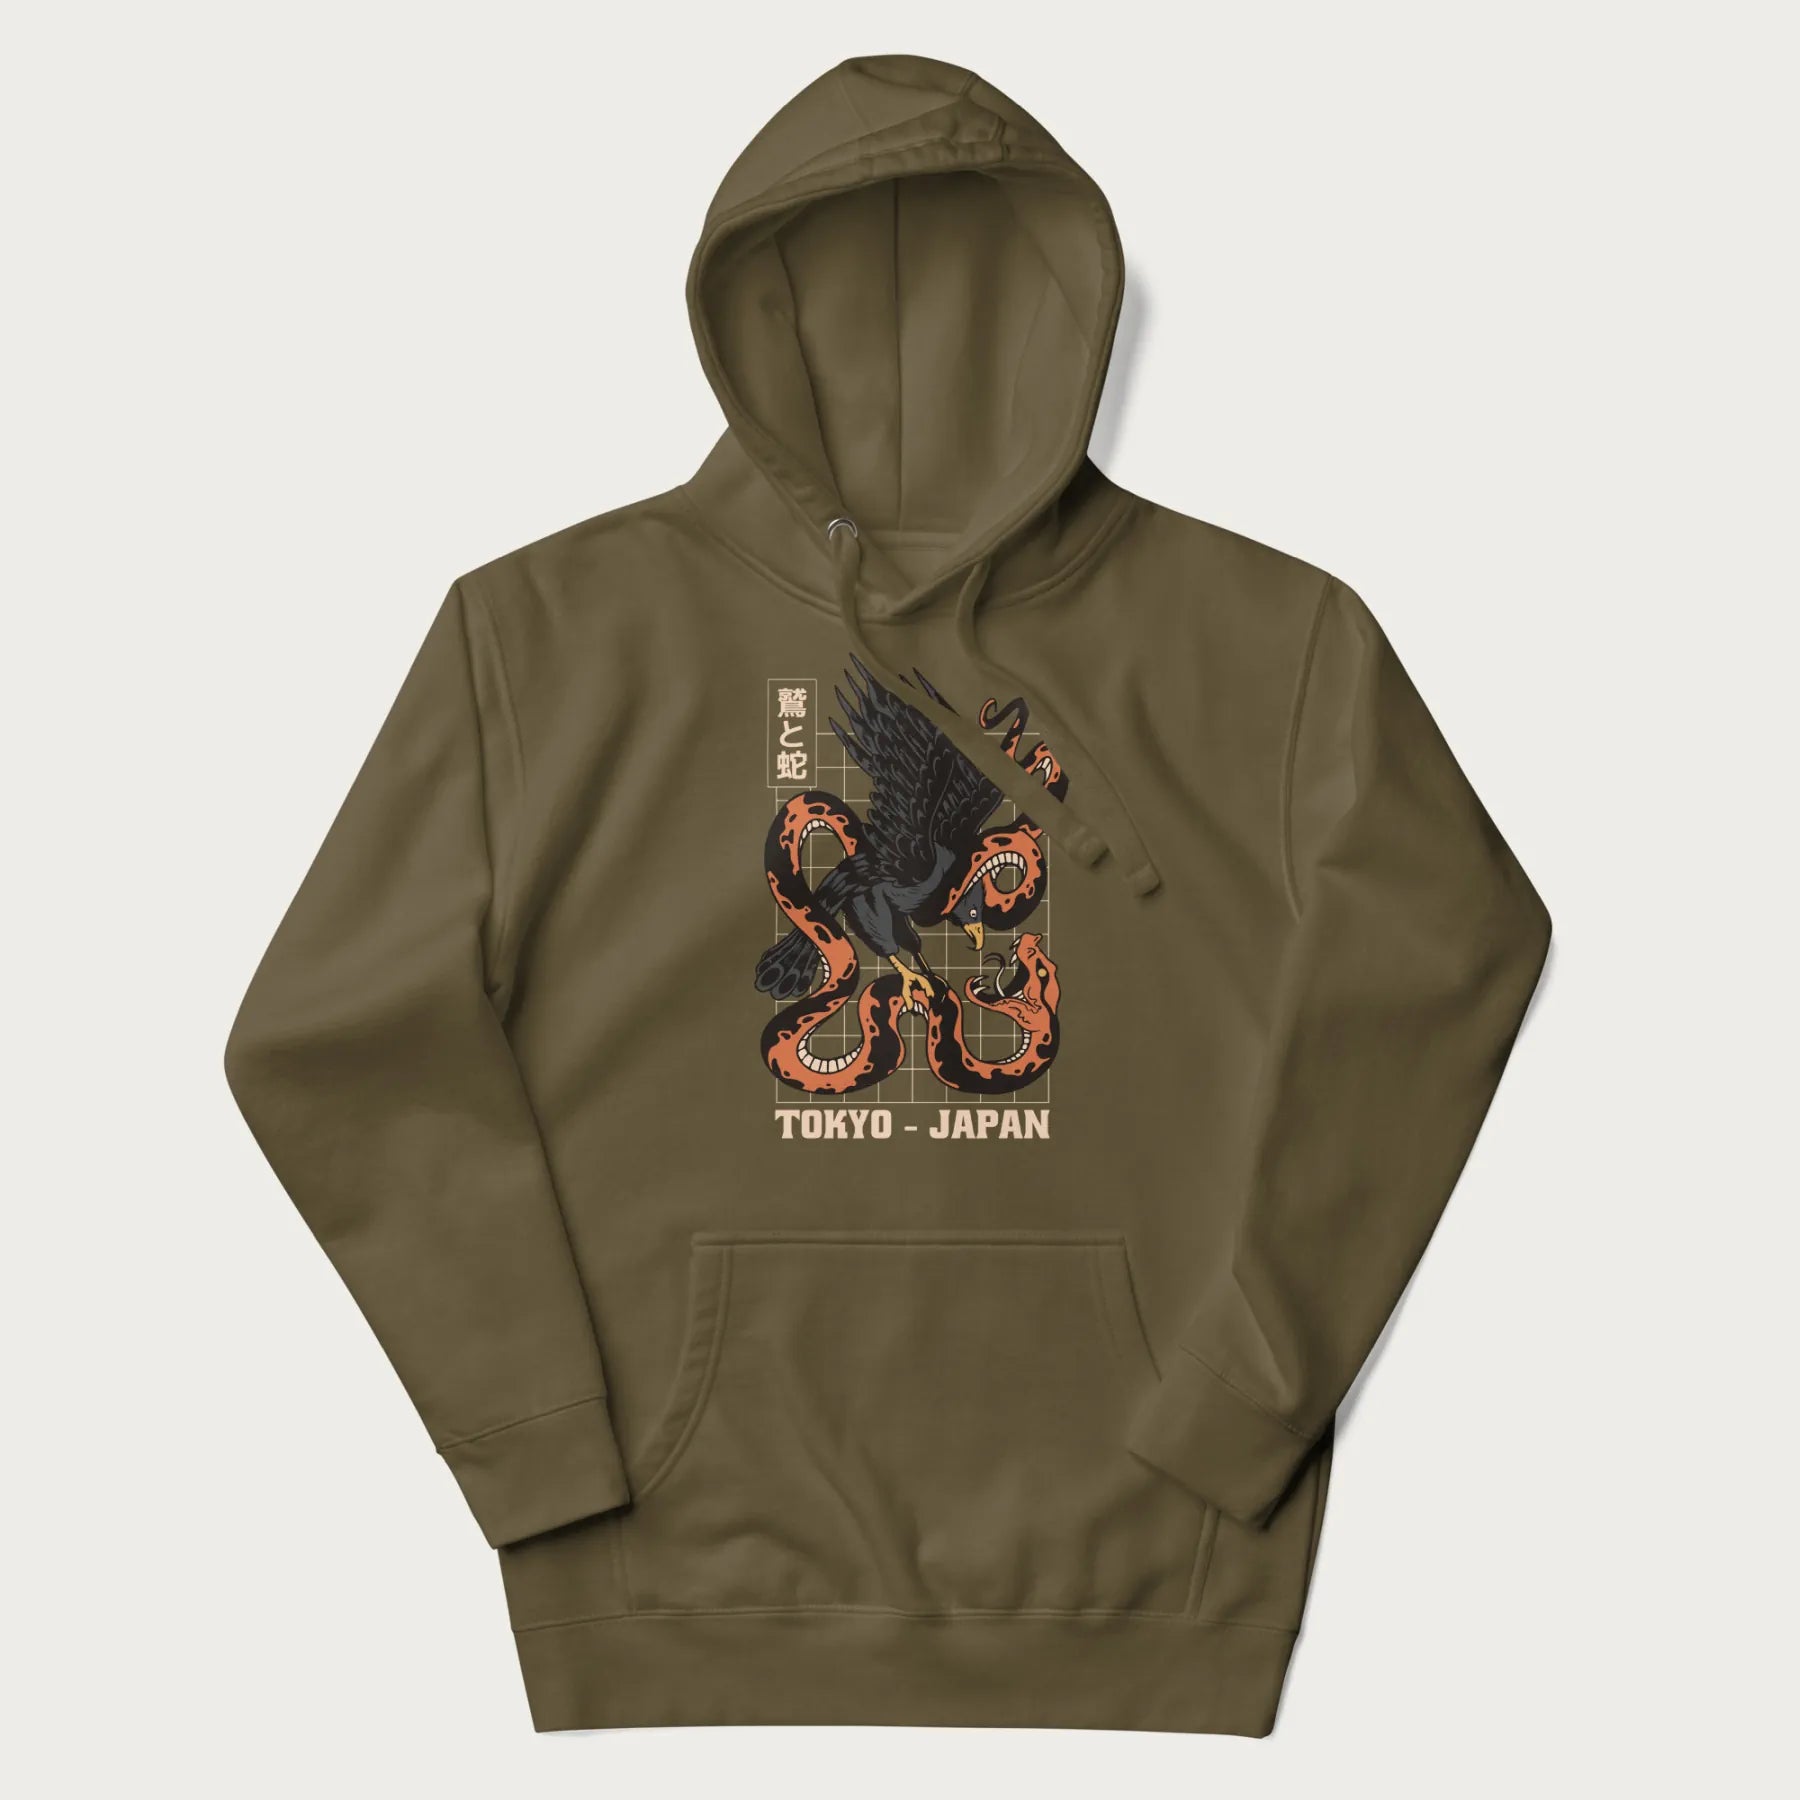 Military green hoodie with Japanese text and a graphic of an eagle battling a snake, with the text 'Tokyo Japan' underneath.